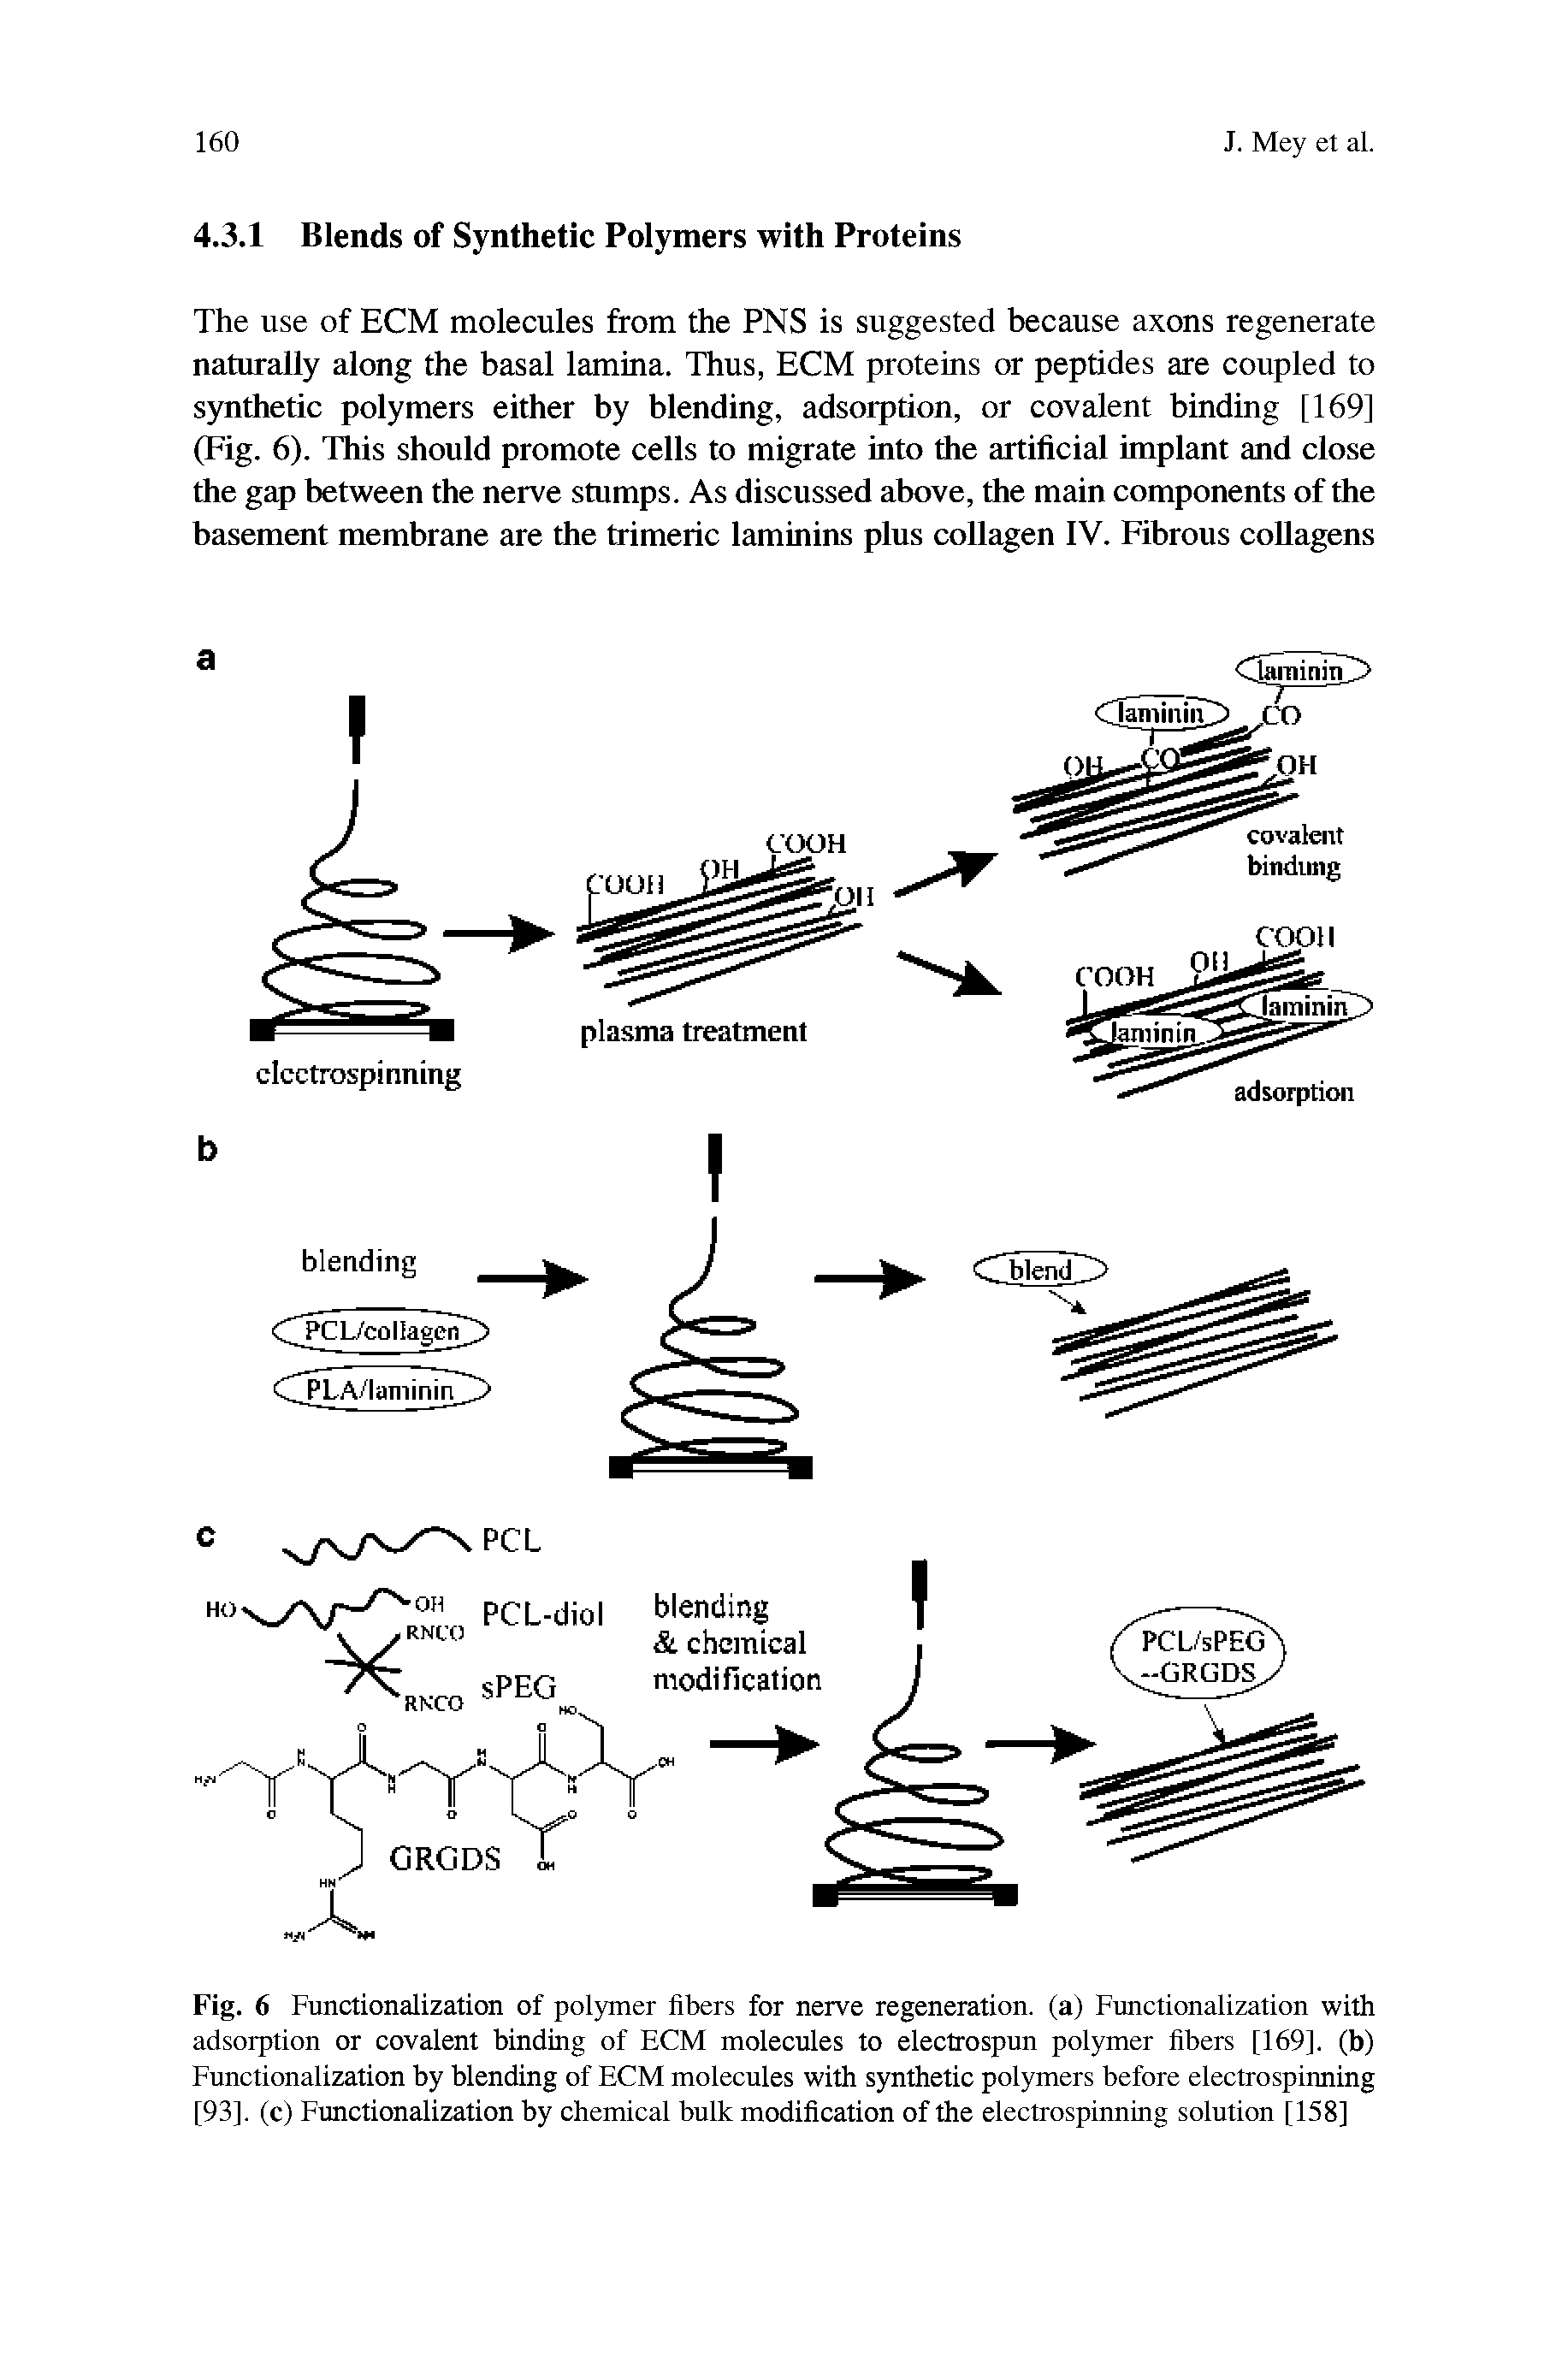 Fig. 6 Functionalization of polymer fibers for nerve regeneration, (a) Functionalization with adsorption or covalent binding of ECM molecules to electrospun polymer fibers [169]. (b) Functionalization by blending of ECM molecules with synthetic polymers before electrospinning [93]. (c) Functionalization by chemical bulk modification of the electrospinnuig solution [158]...